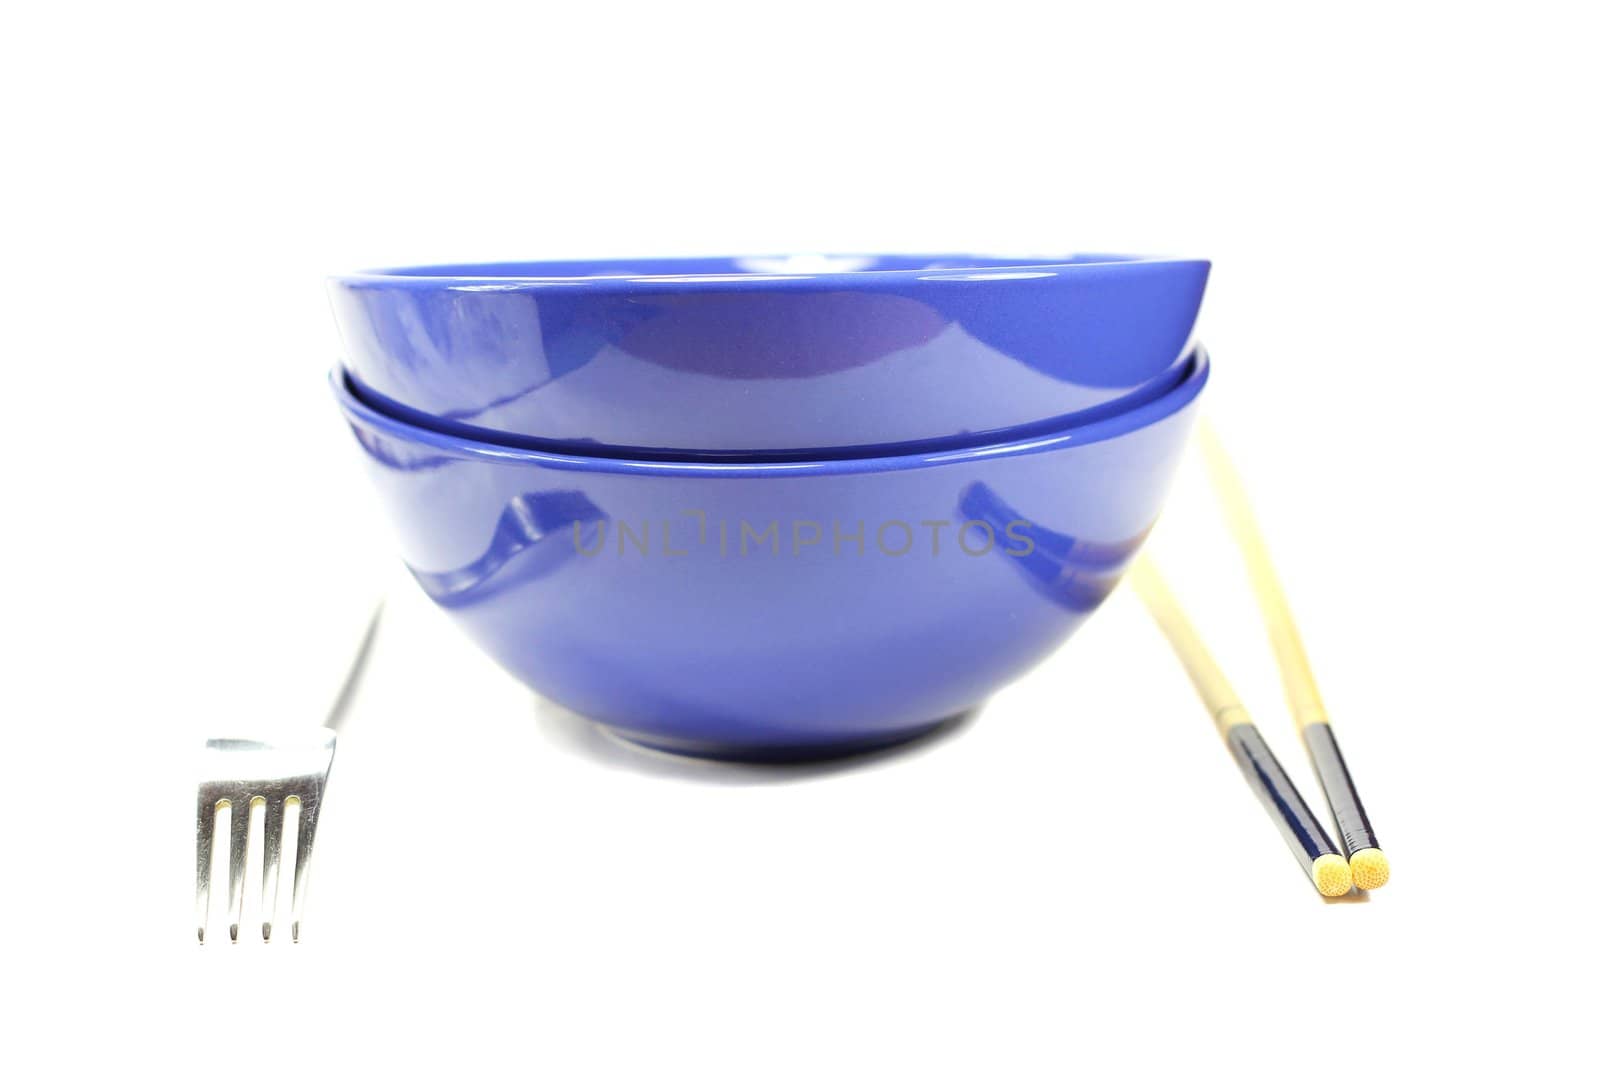 Two dark blue bowls, fork and chopsticks on a white background